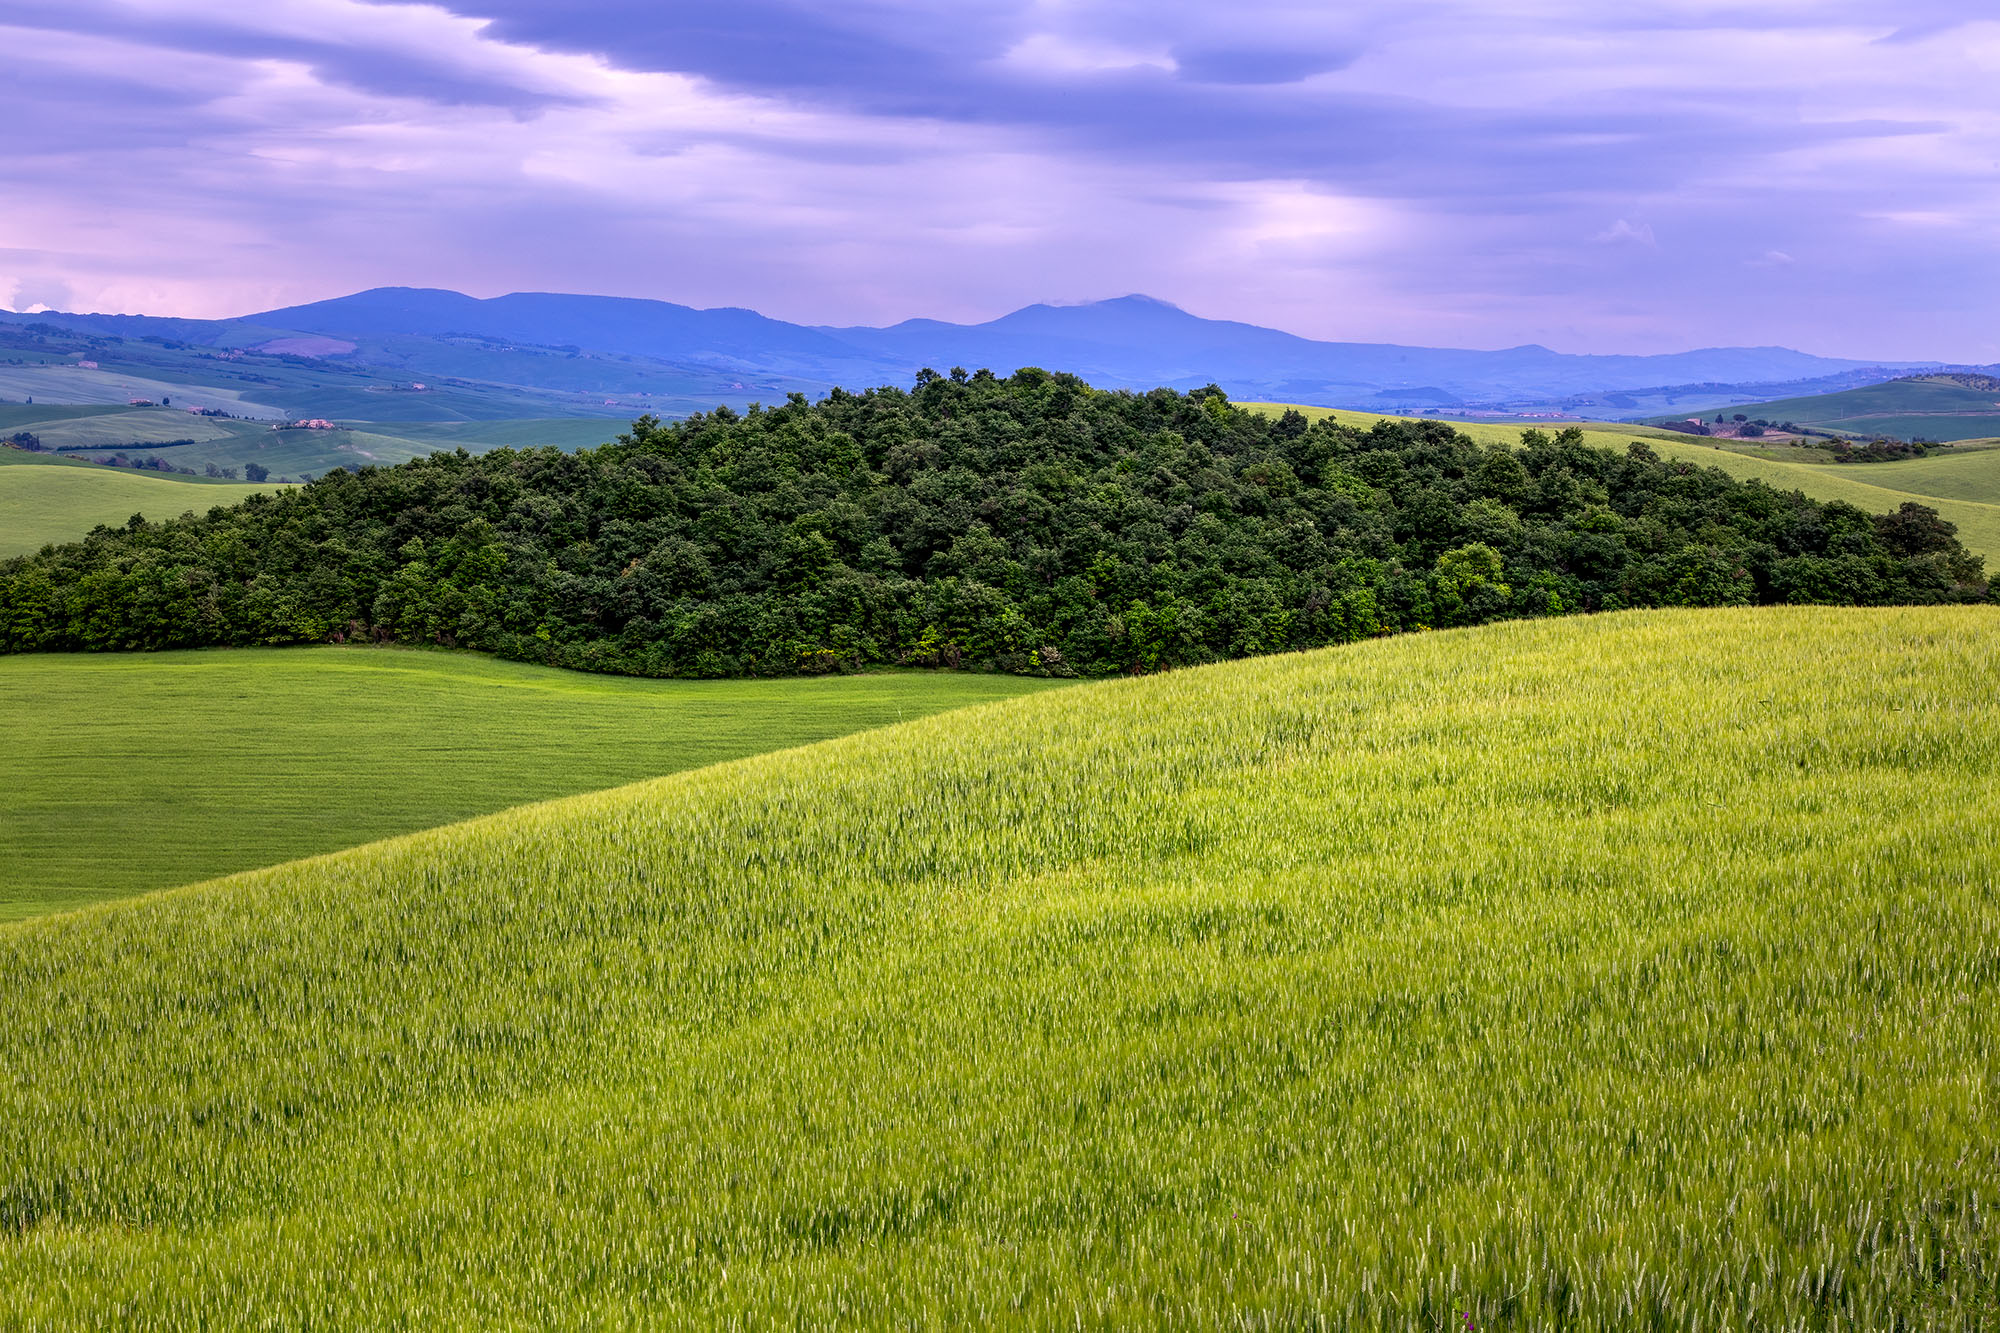 In this image, the Tuscan landscape unfurls its springtime charm. Rolling hills dressed in vibrant green stretch as far as the...